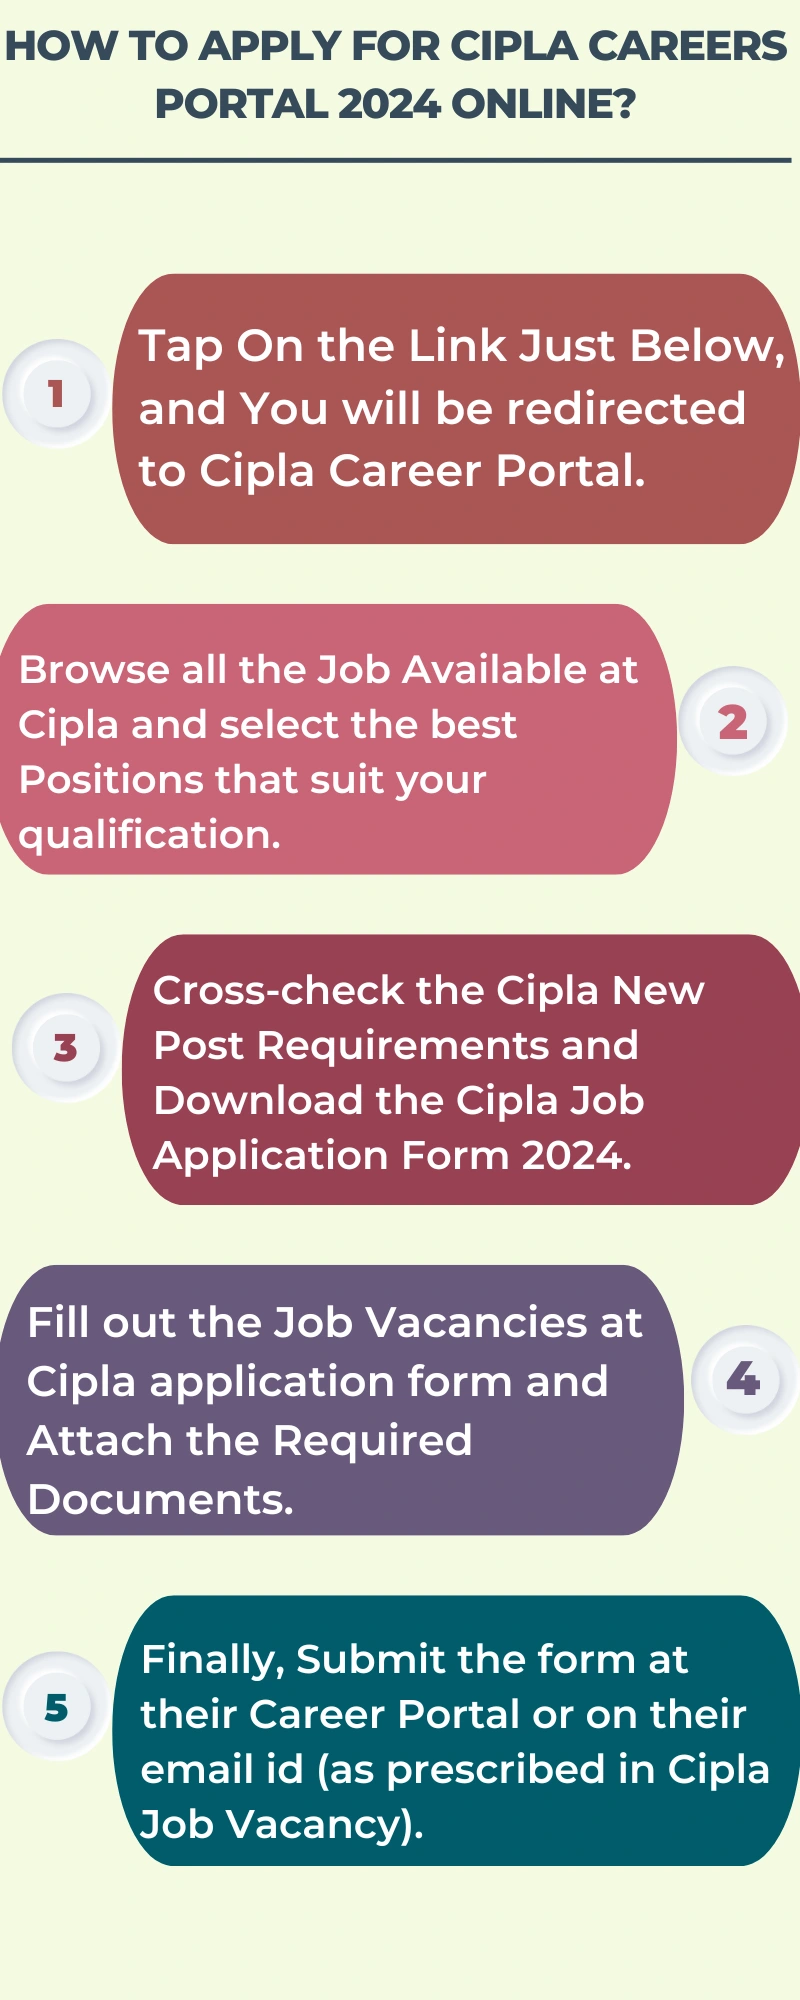 How To Apply for Cipla Careers Portal 2024 Online?